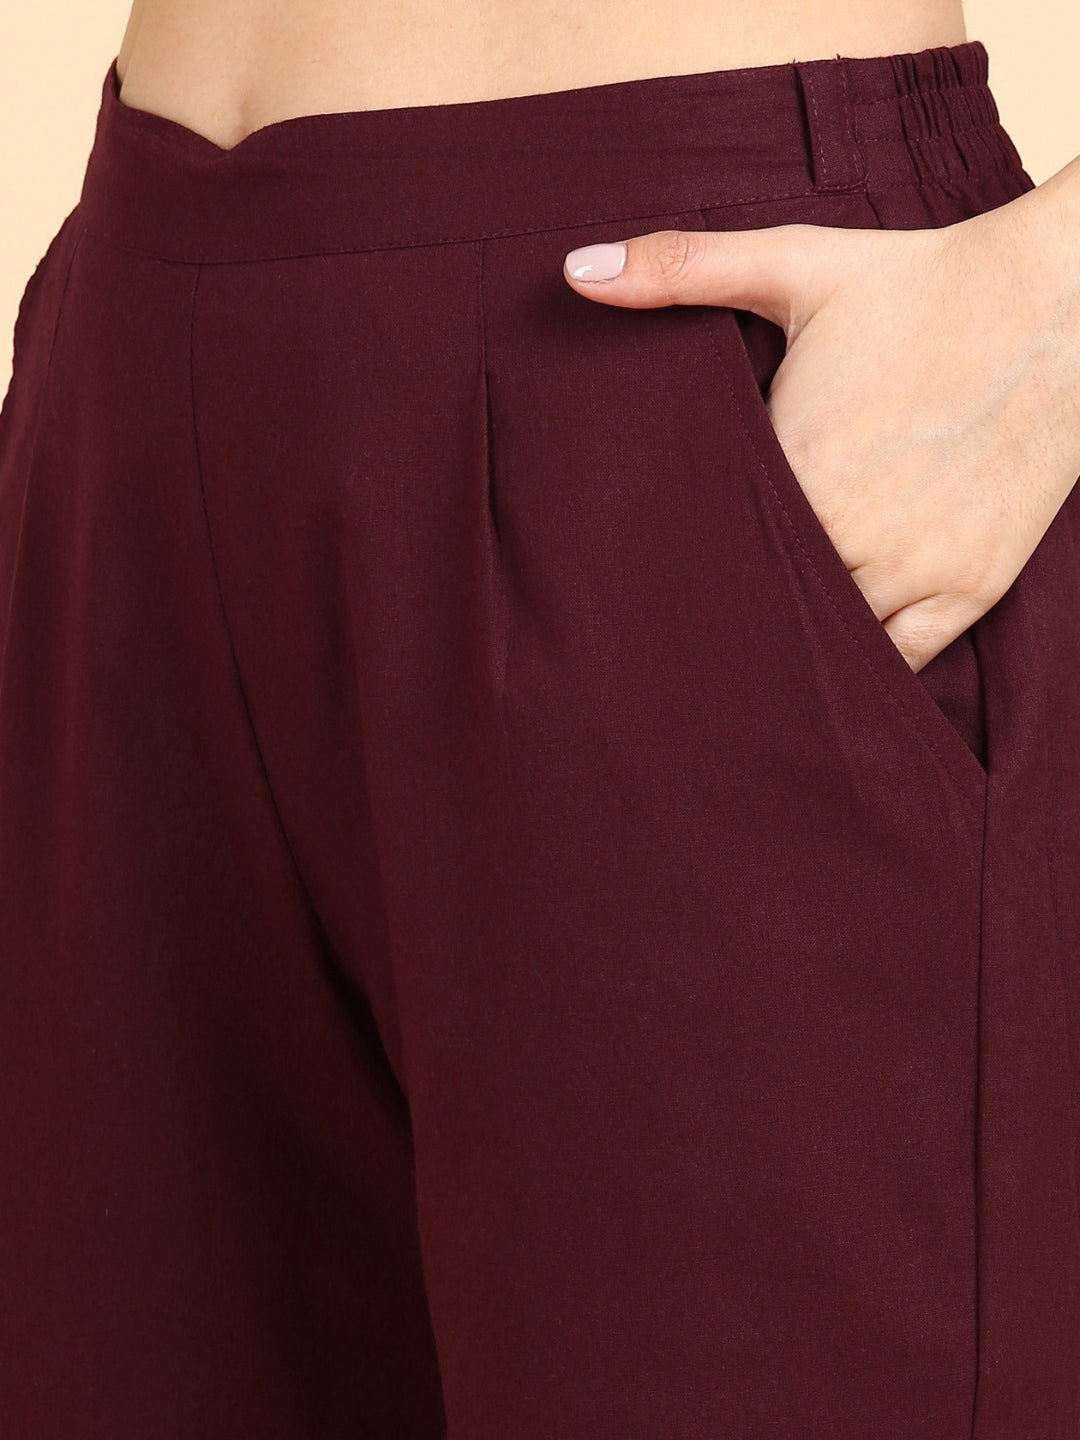 Soft Cotton Solid Color Pant - Maroon